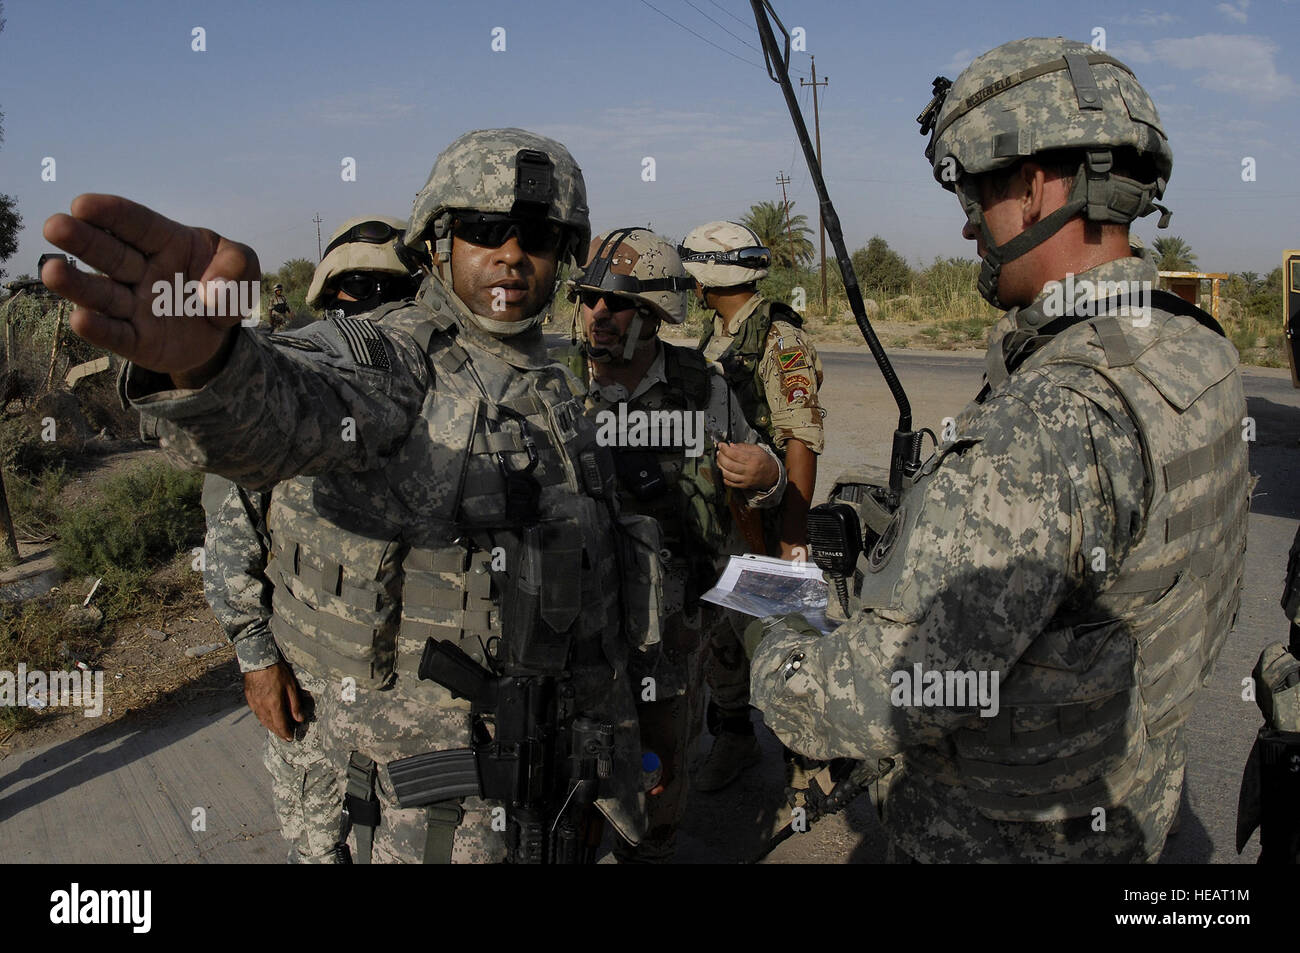 U.S. Army Soldiers, of the Alpha Company, 1st Battalion, 7th Cavalry Regiment, 1st Brigade Combat Team, 1st Cavalry Division, refer to a map during a mission in Taji, Iraq, Sept. 15. Stock Photo